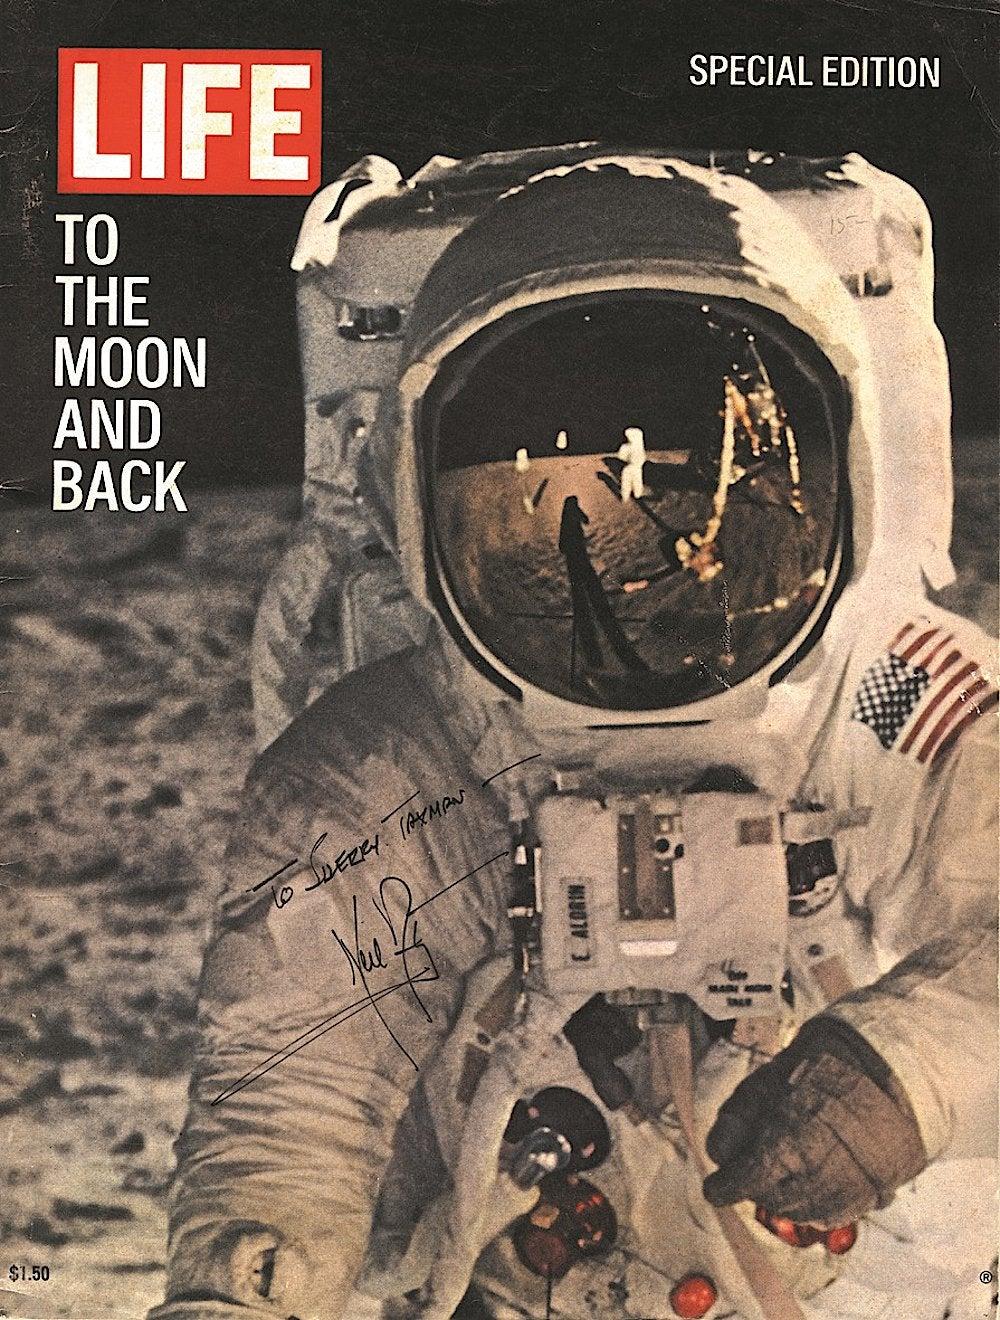 British Neil Armstrong Signed Copy of Life Magazine, 1960s / 1970s